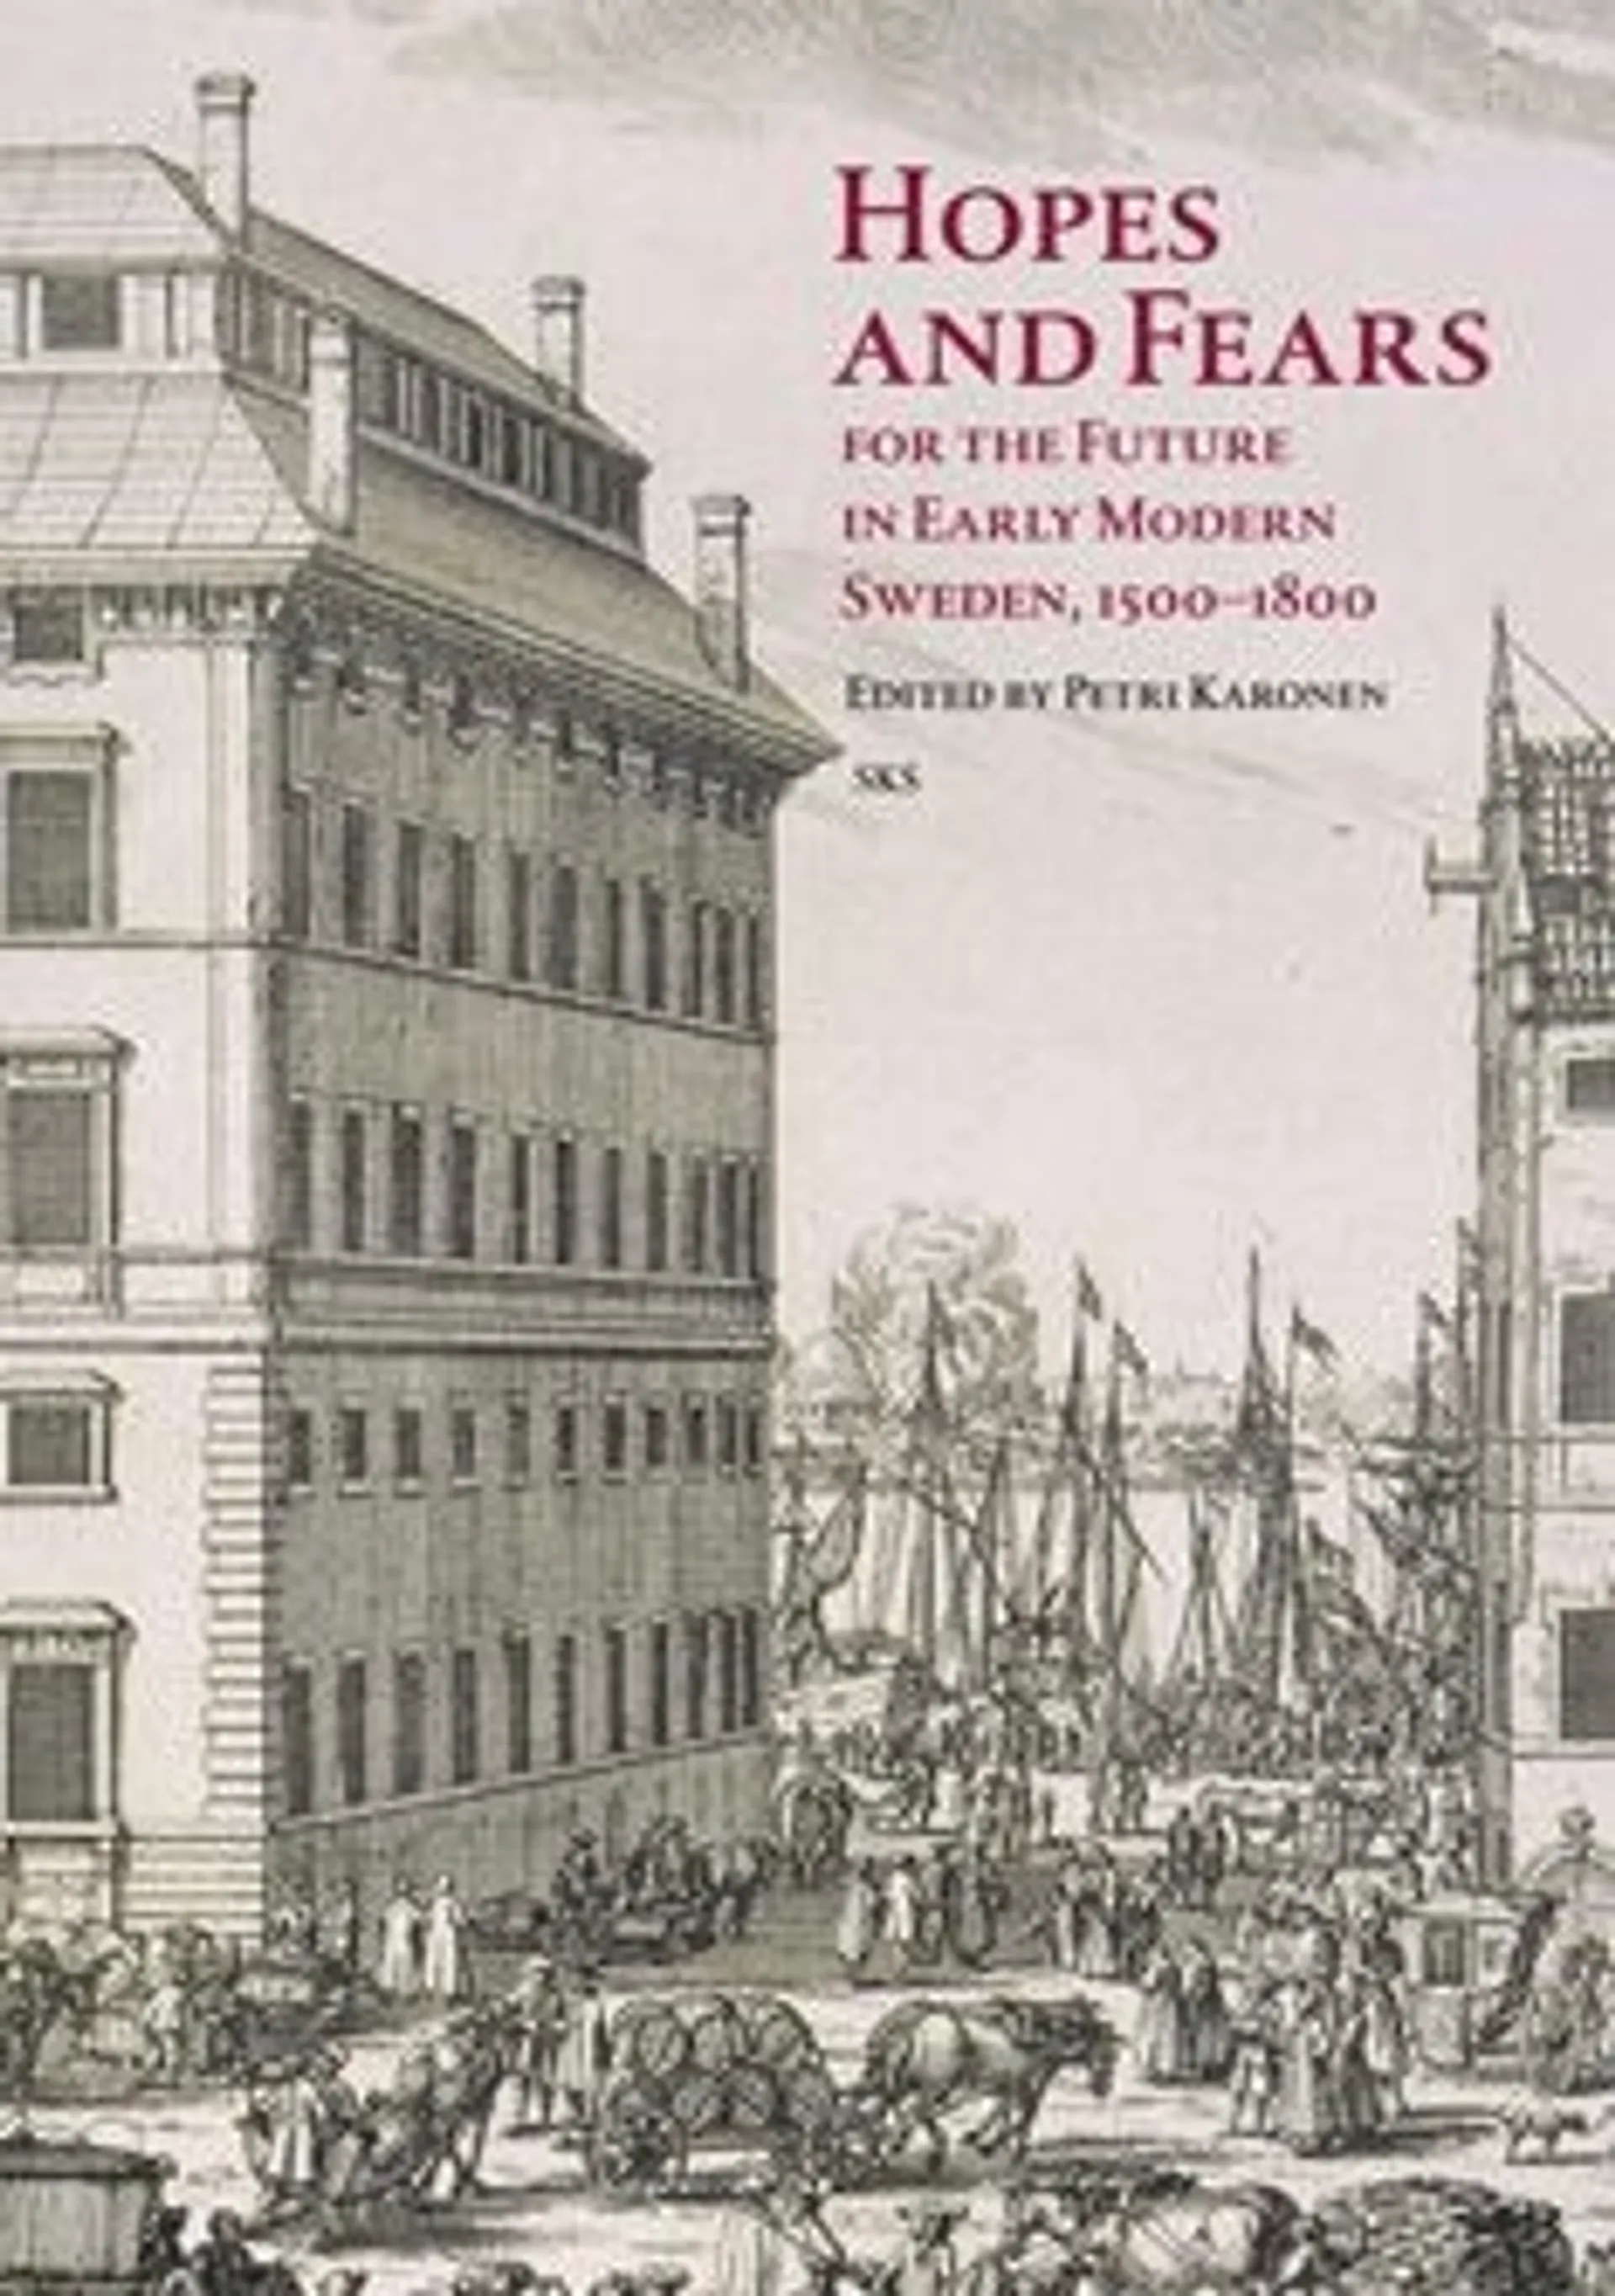 Hopes and Fears for the Future in Early Modern Sweden, 1500-1850